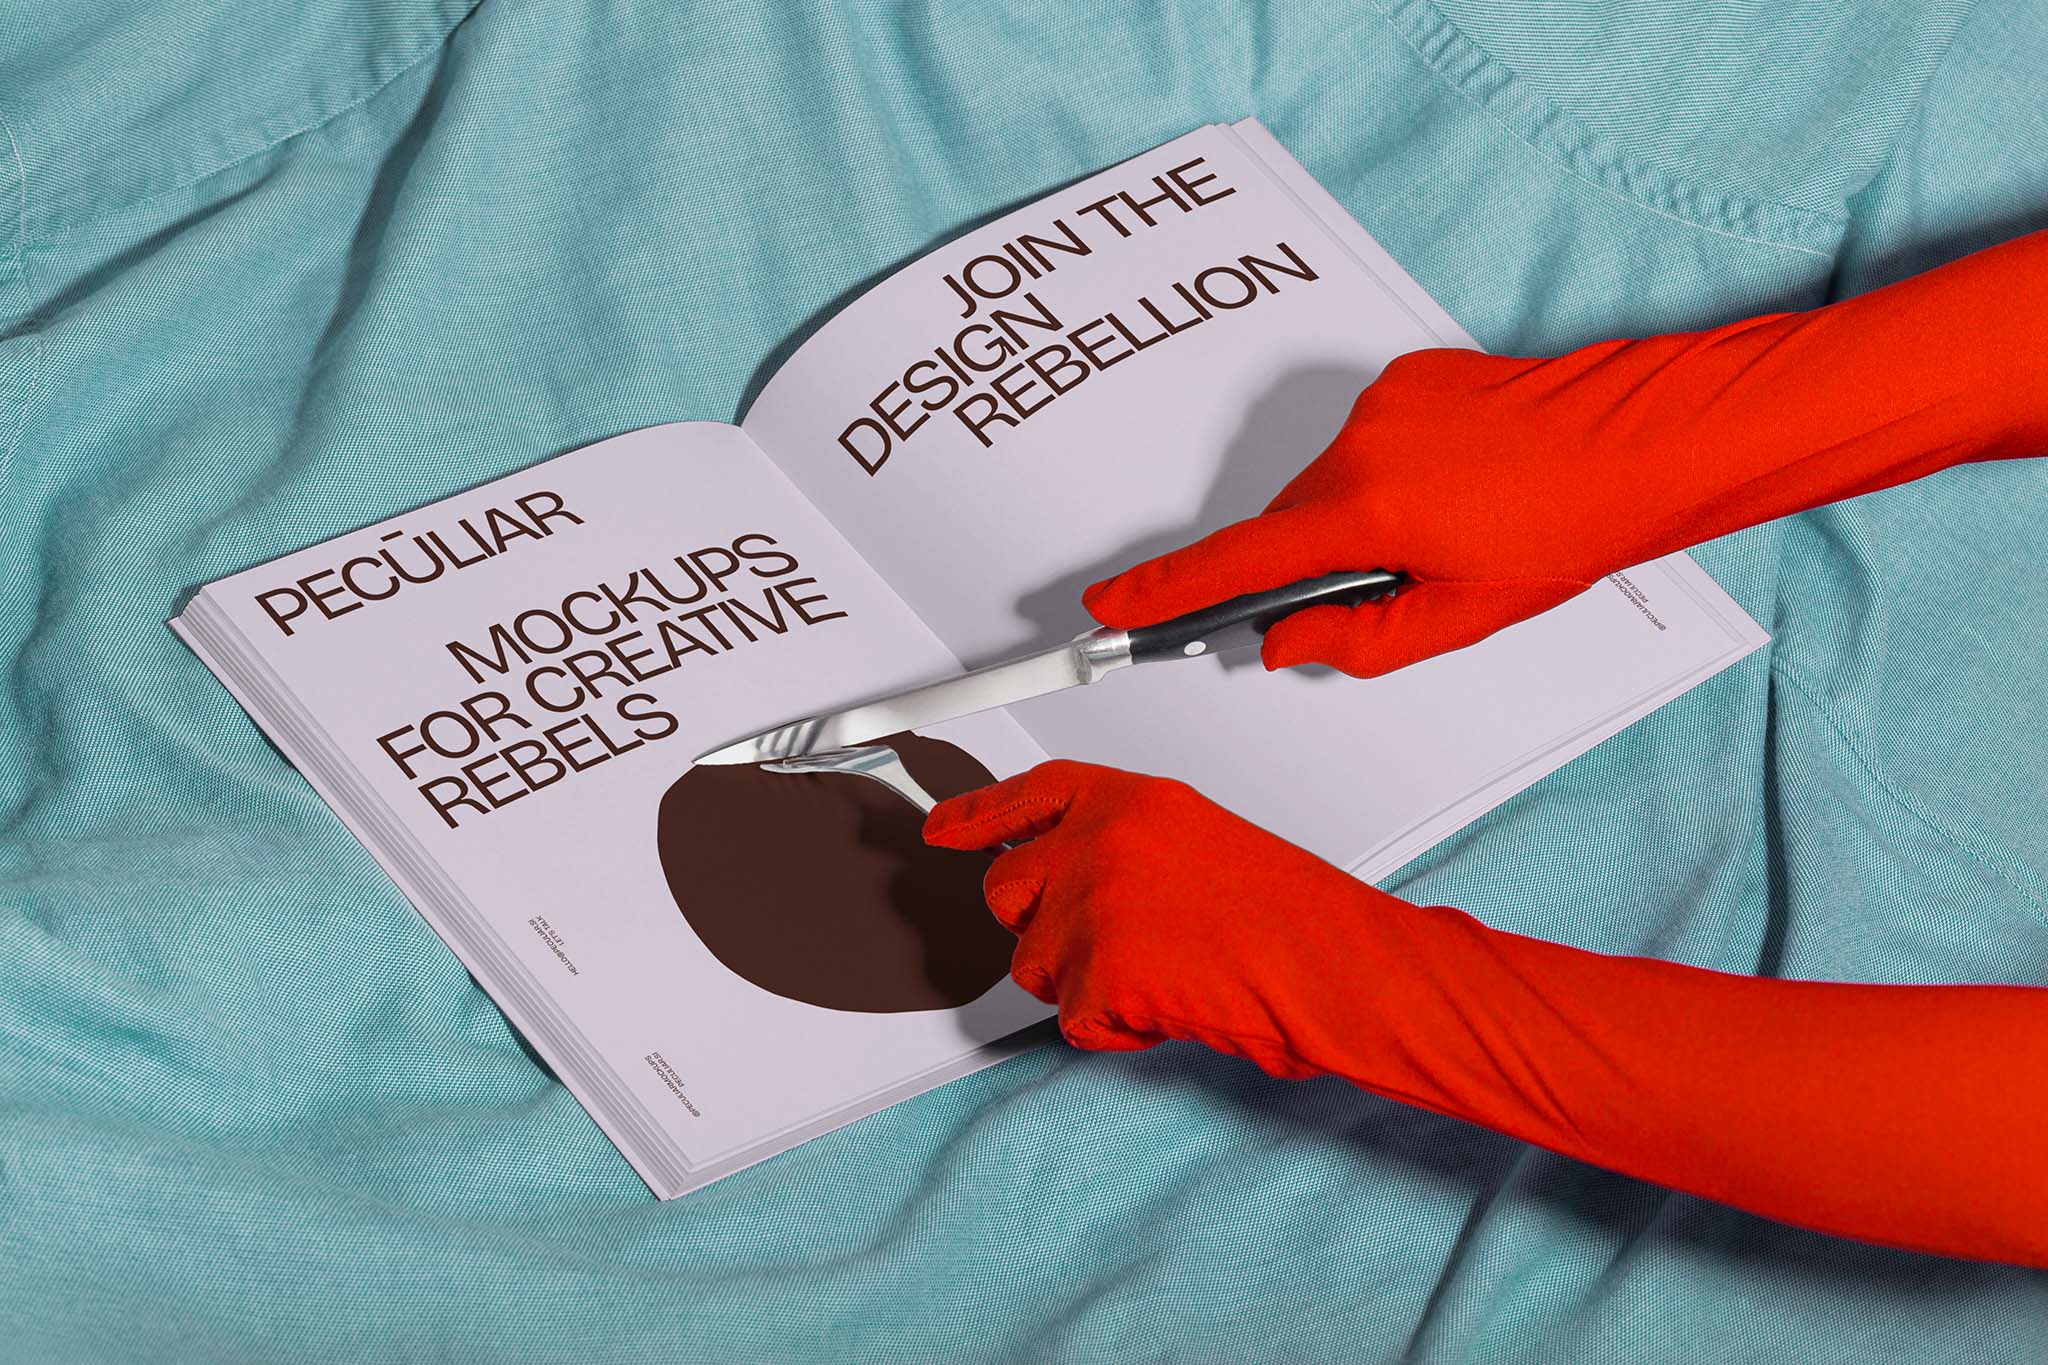 Two gloved hands holding utensils over an open book mockup set against light blue fabric, in use example alternative colors.